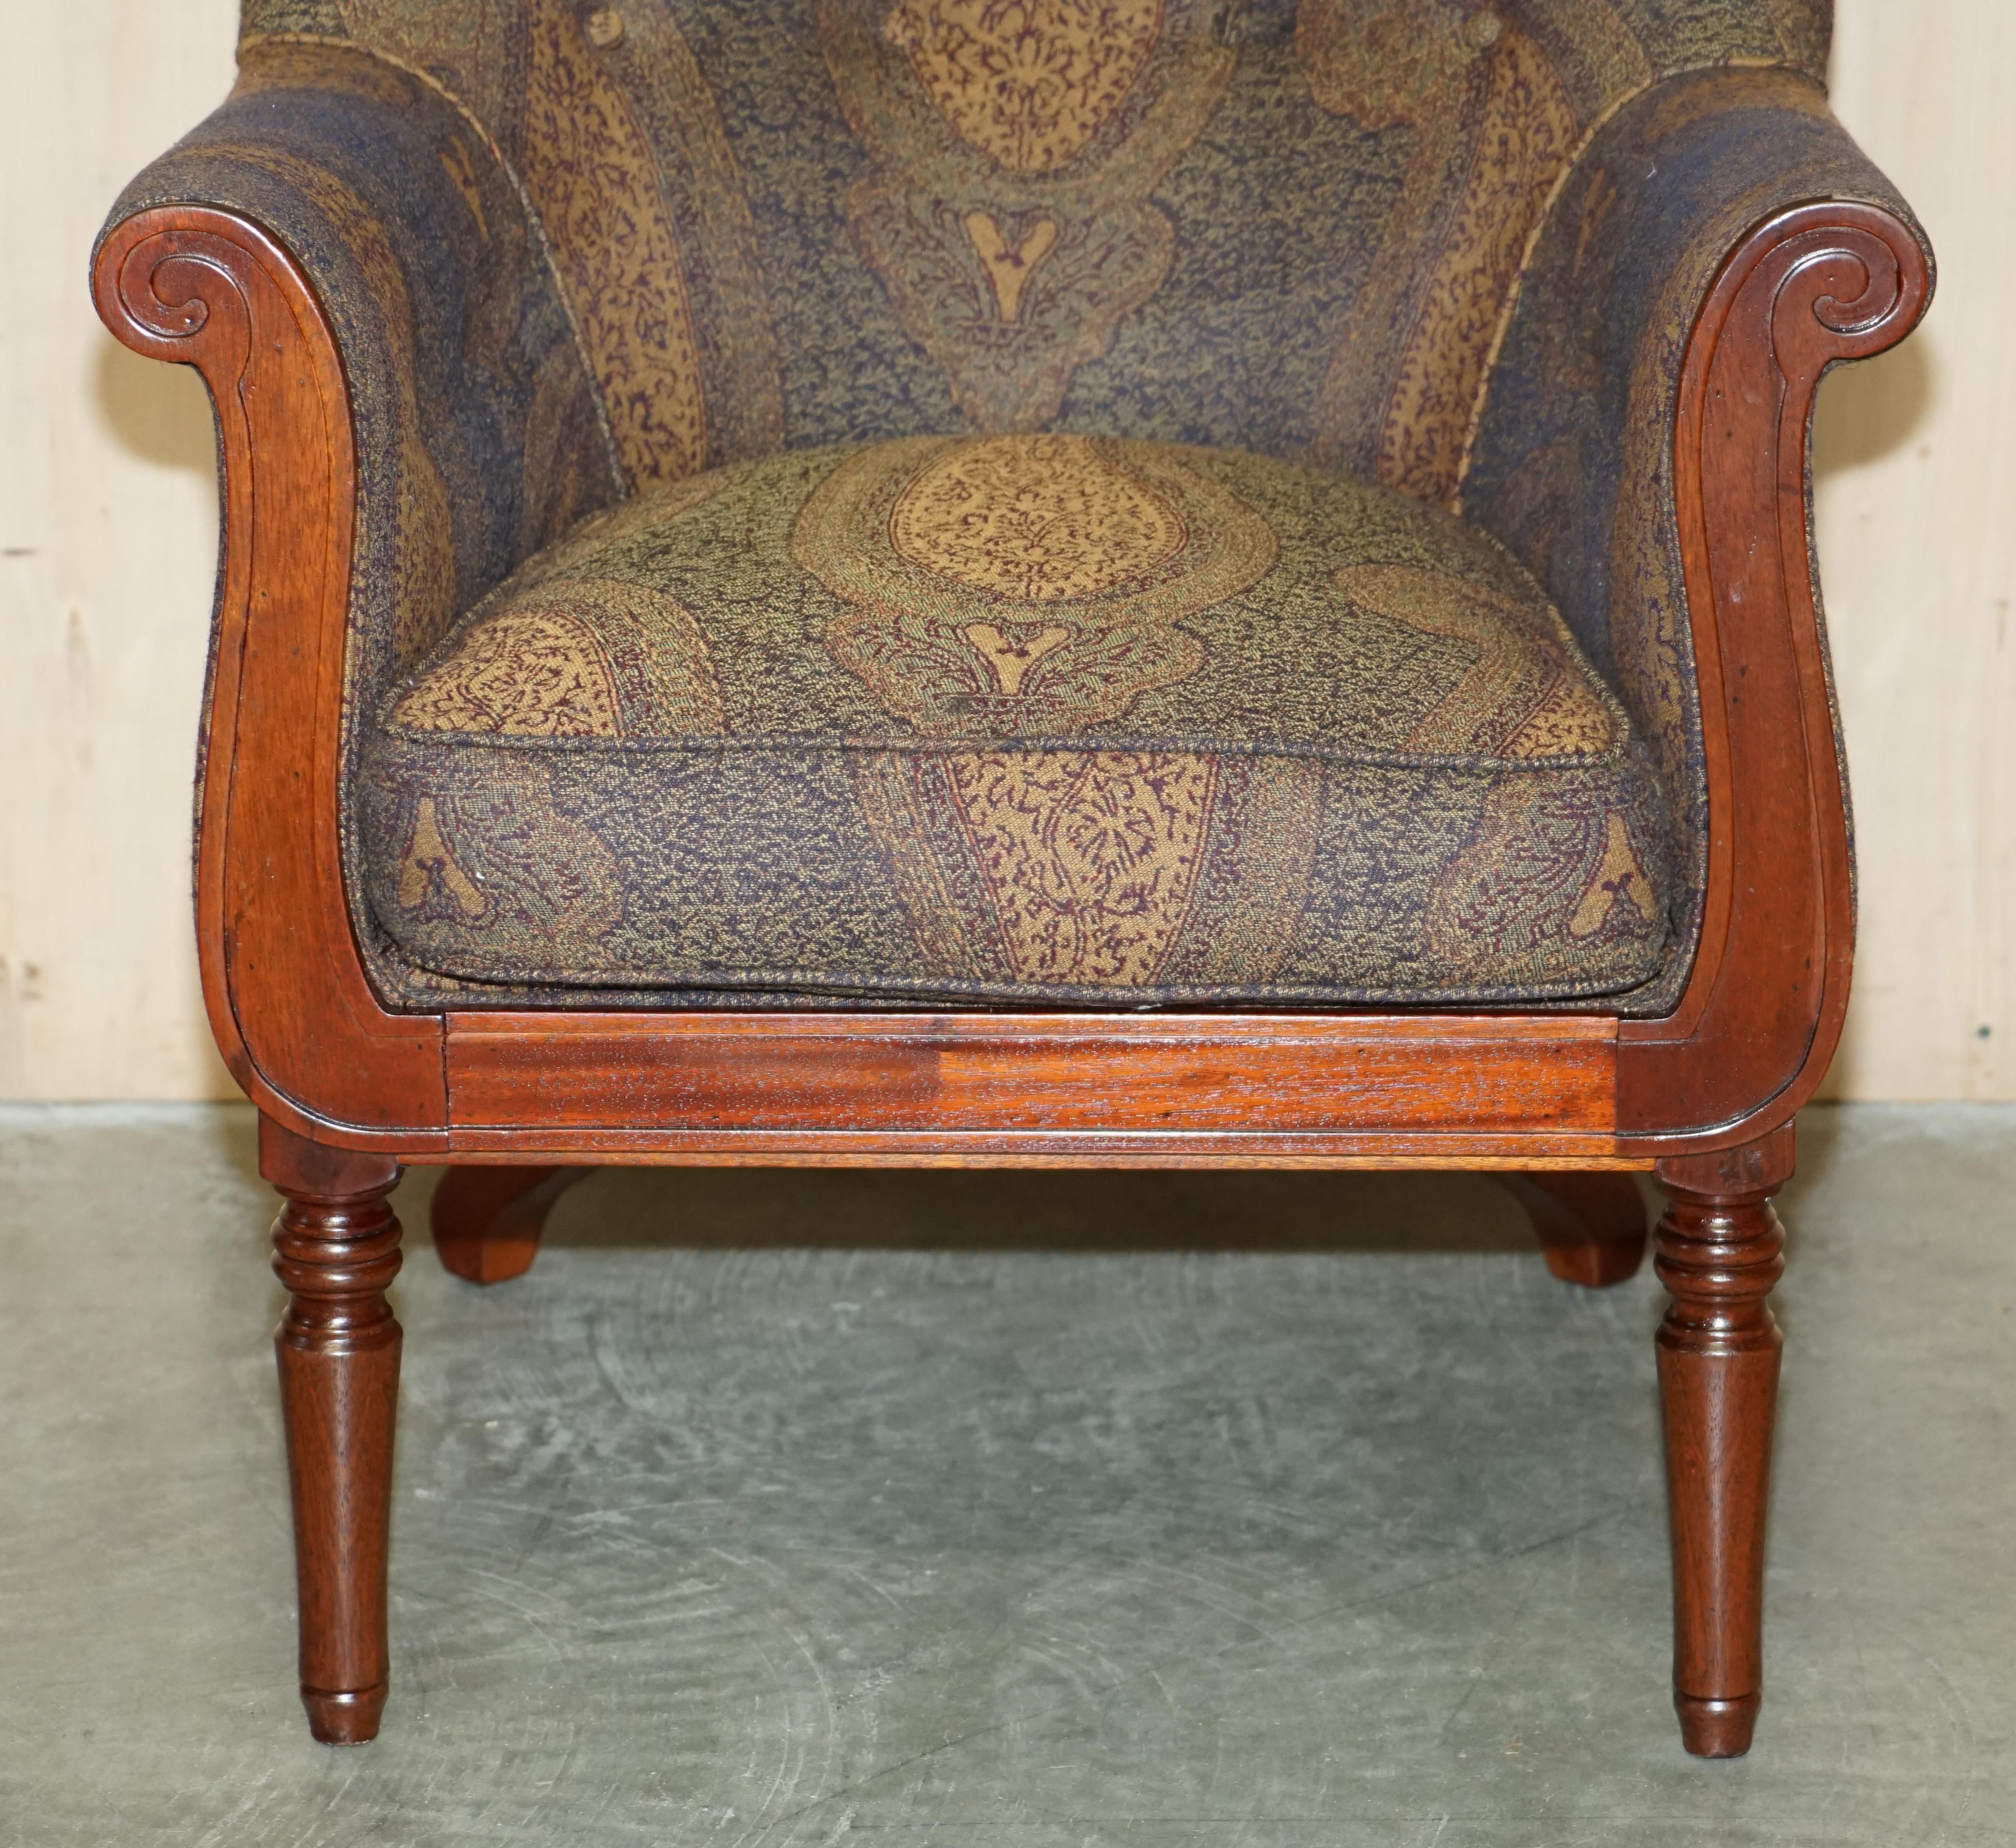 Hand-Crafted PAiR OF GEORGE SMITH WILLIAM IV LIBRARY ARMCHAIRS UNIQUE UPHOLSTERY